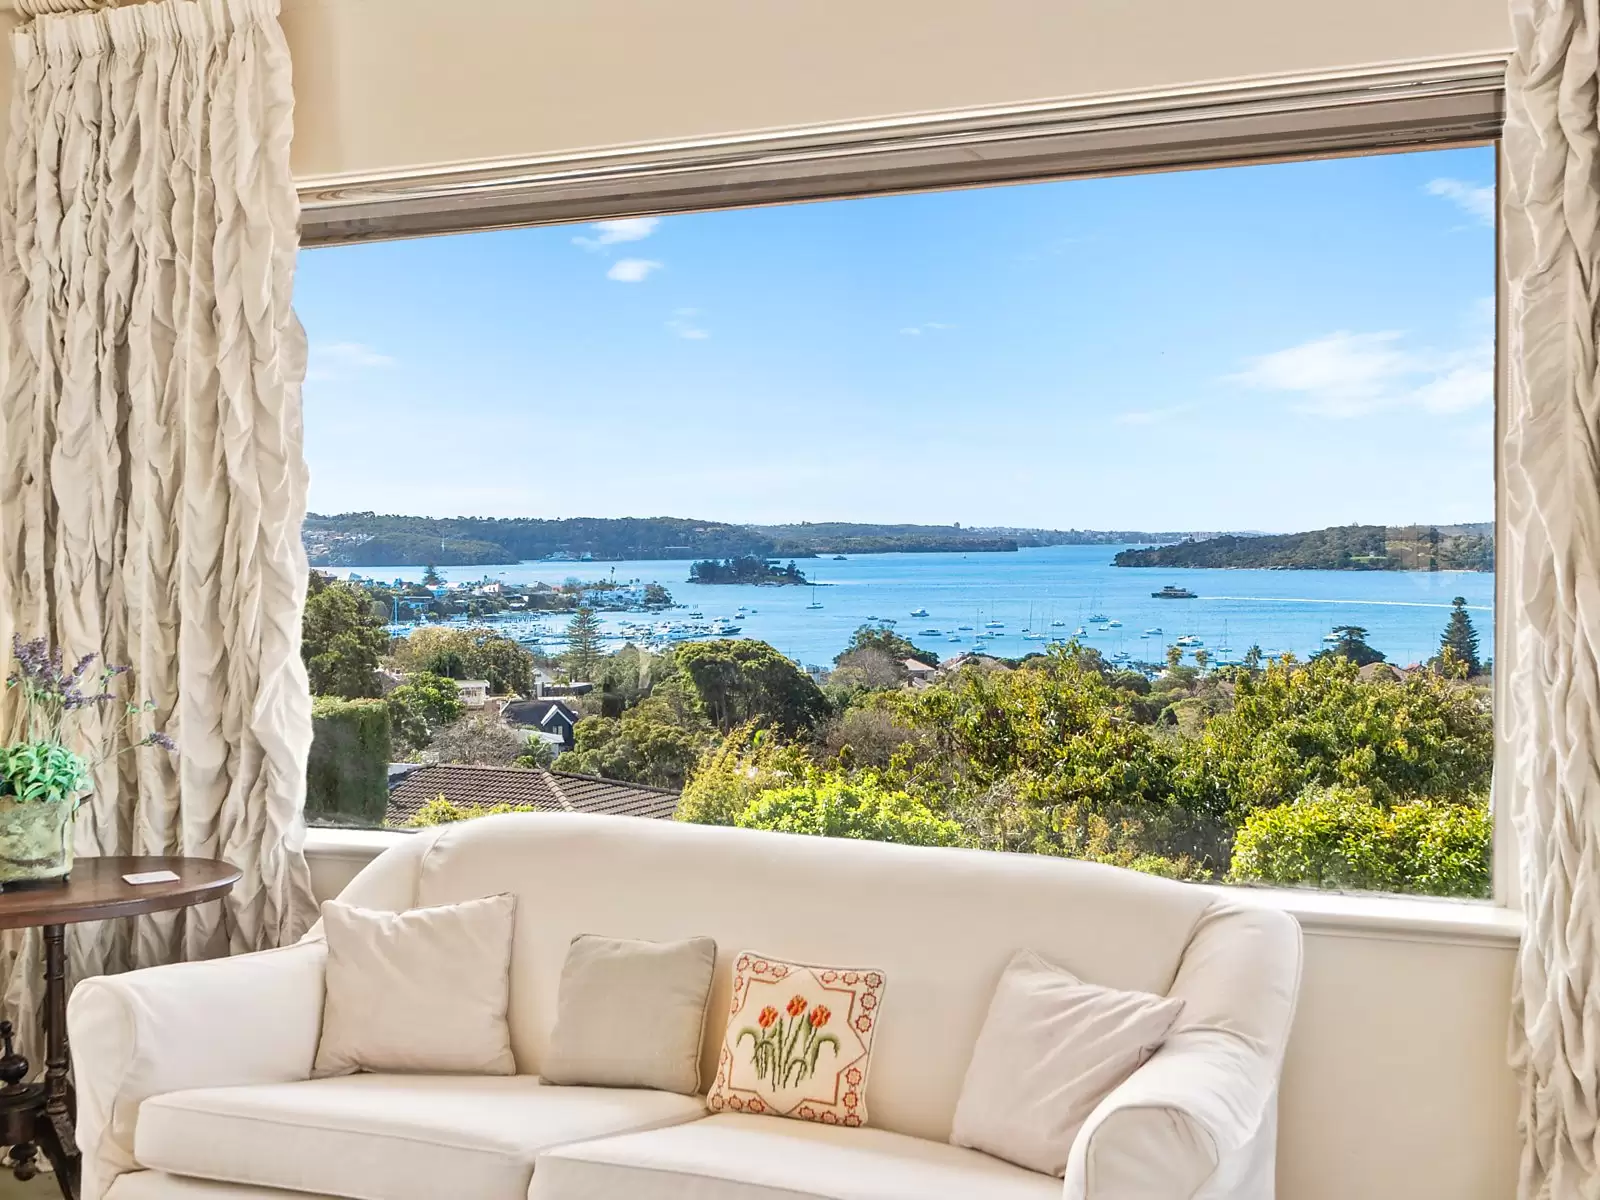 Photo #3: 24A Drumalbyn Road, Bellevue Hill - For Sale by Sydney Sotheby's International Realty